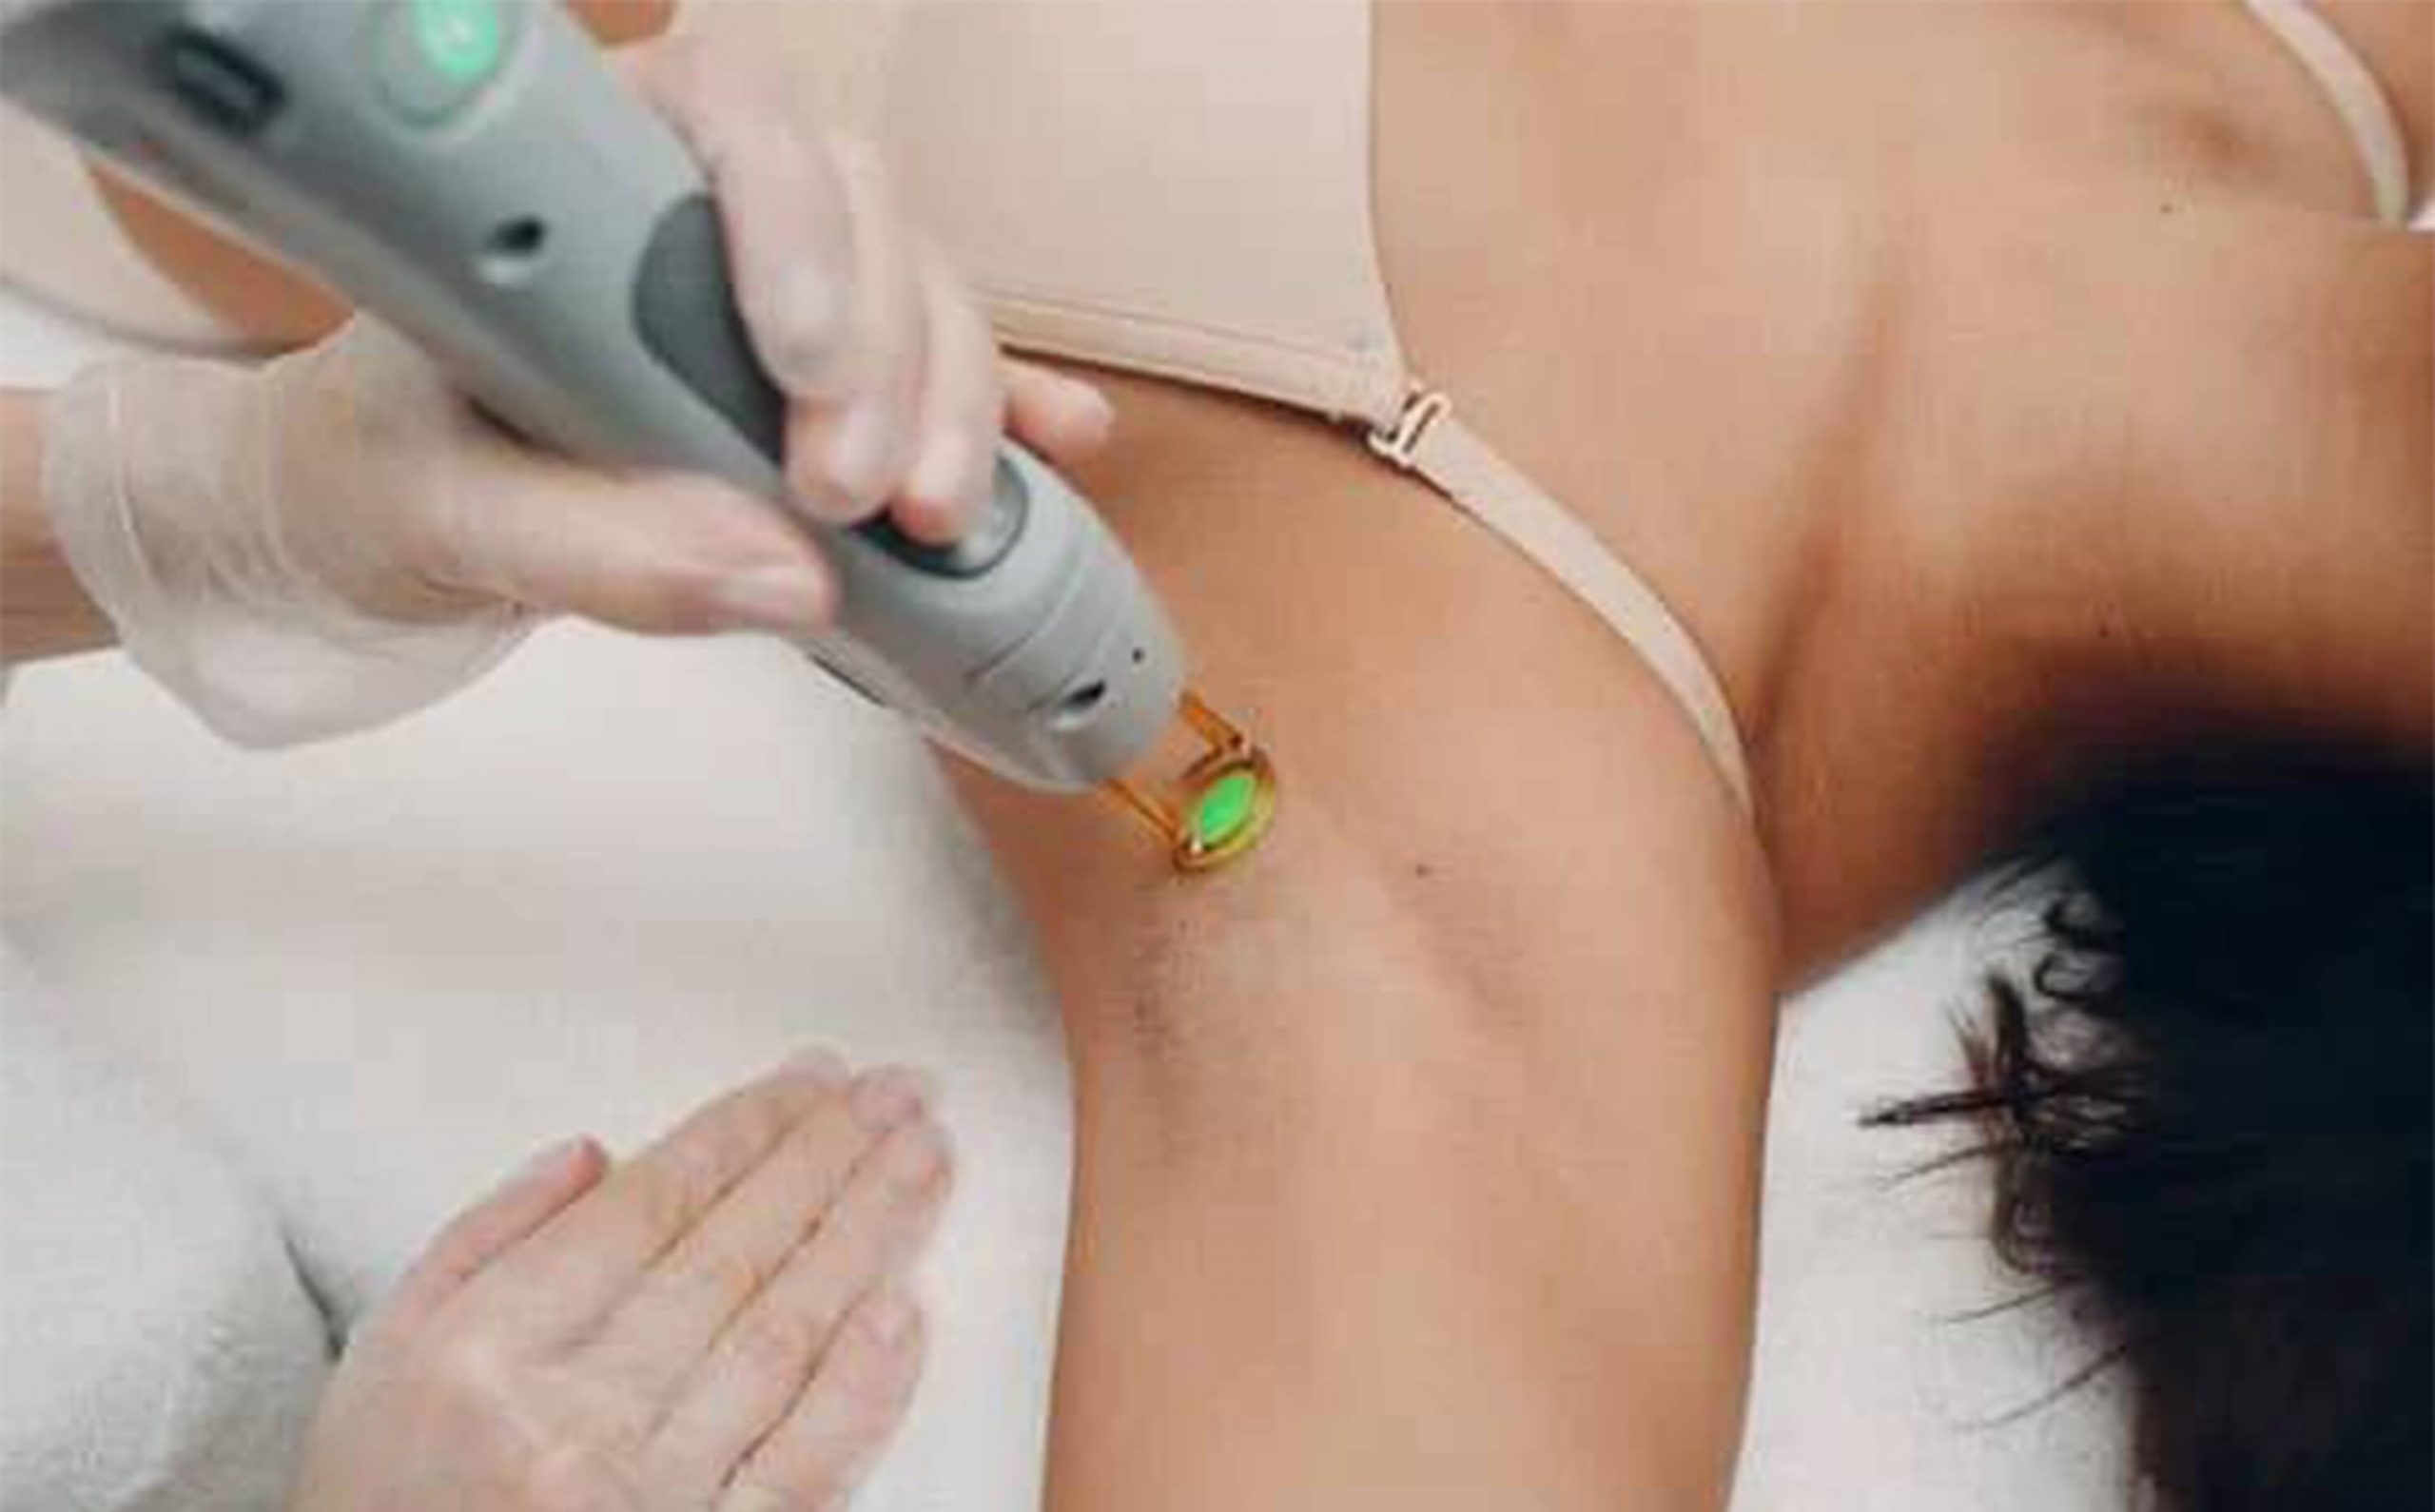 A doctor performing laser hair removal with equipment on the patient's armpit.